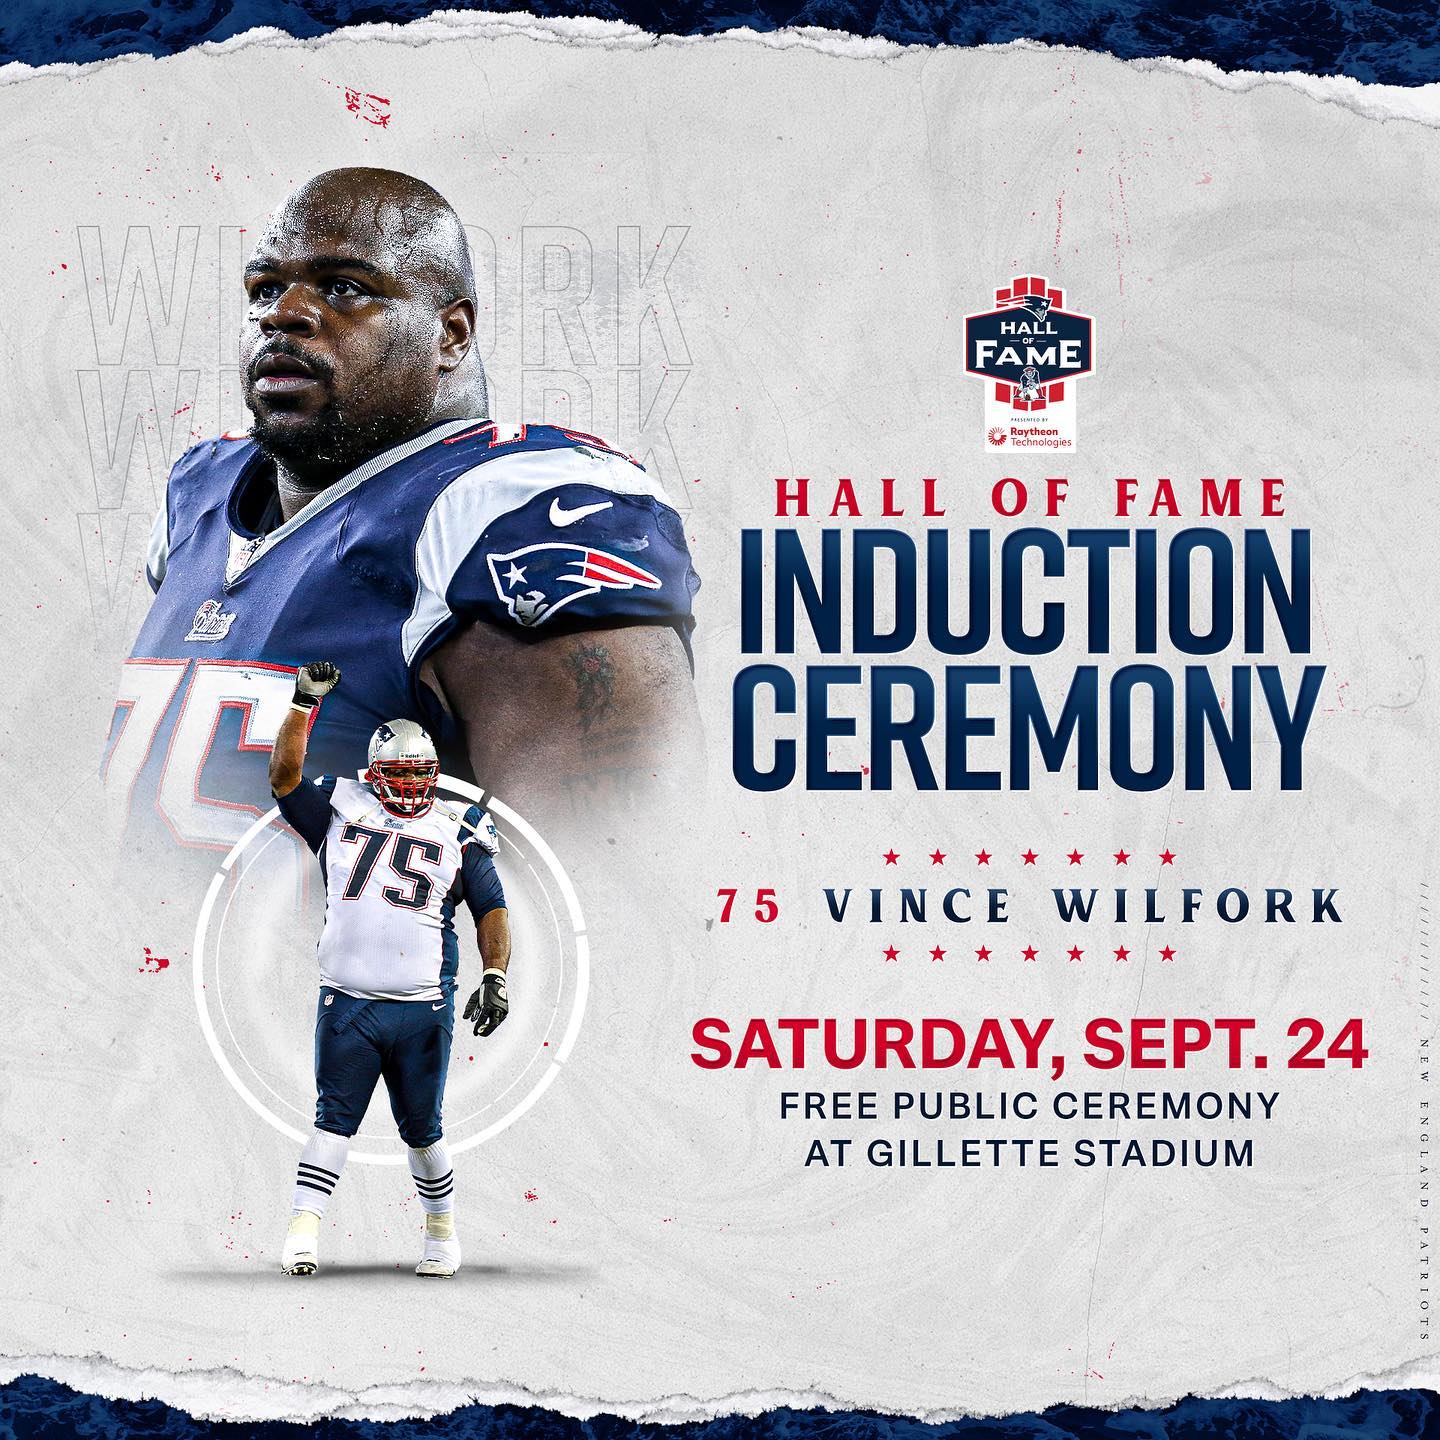 Patriots Hall of Fame – Vince Wilfork Induction Ceremony